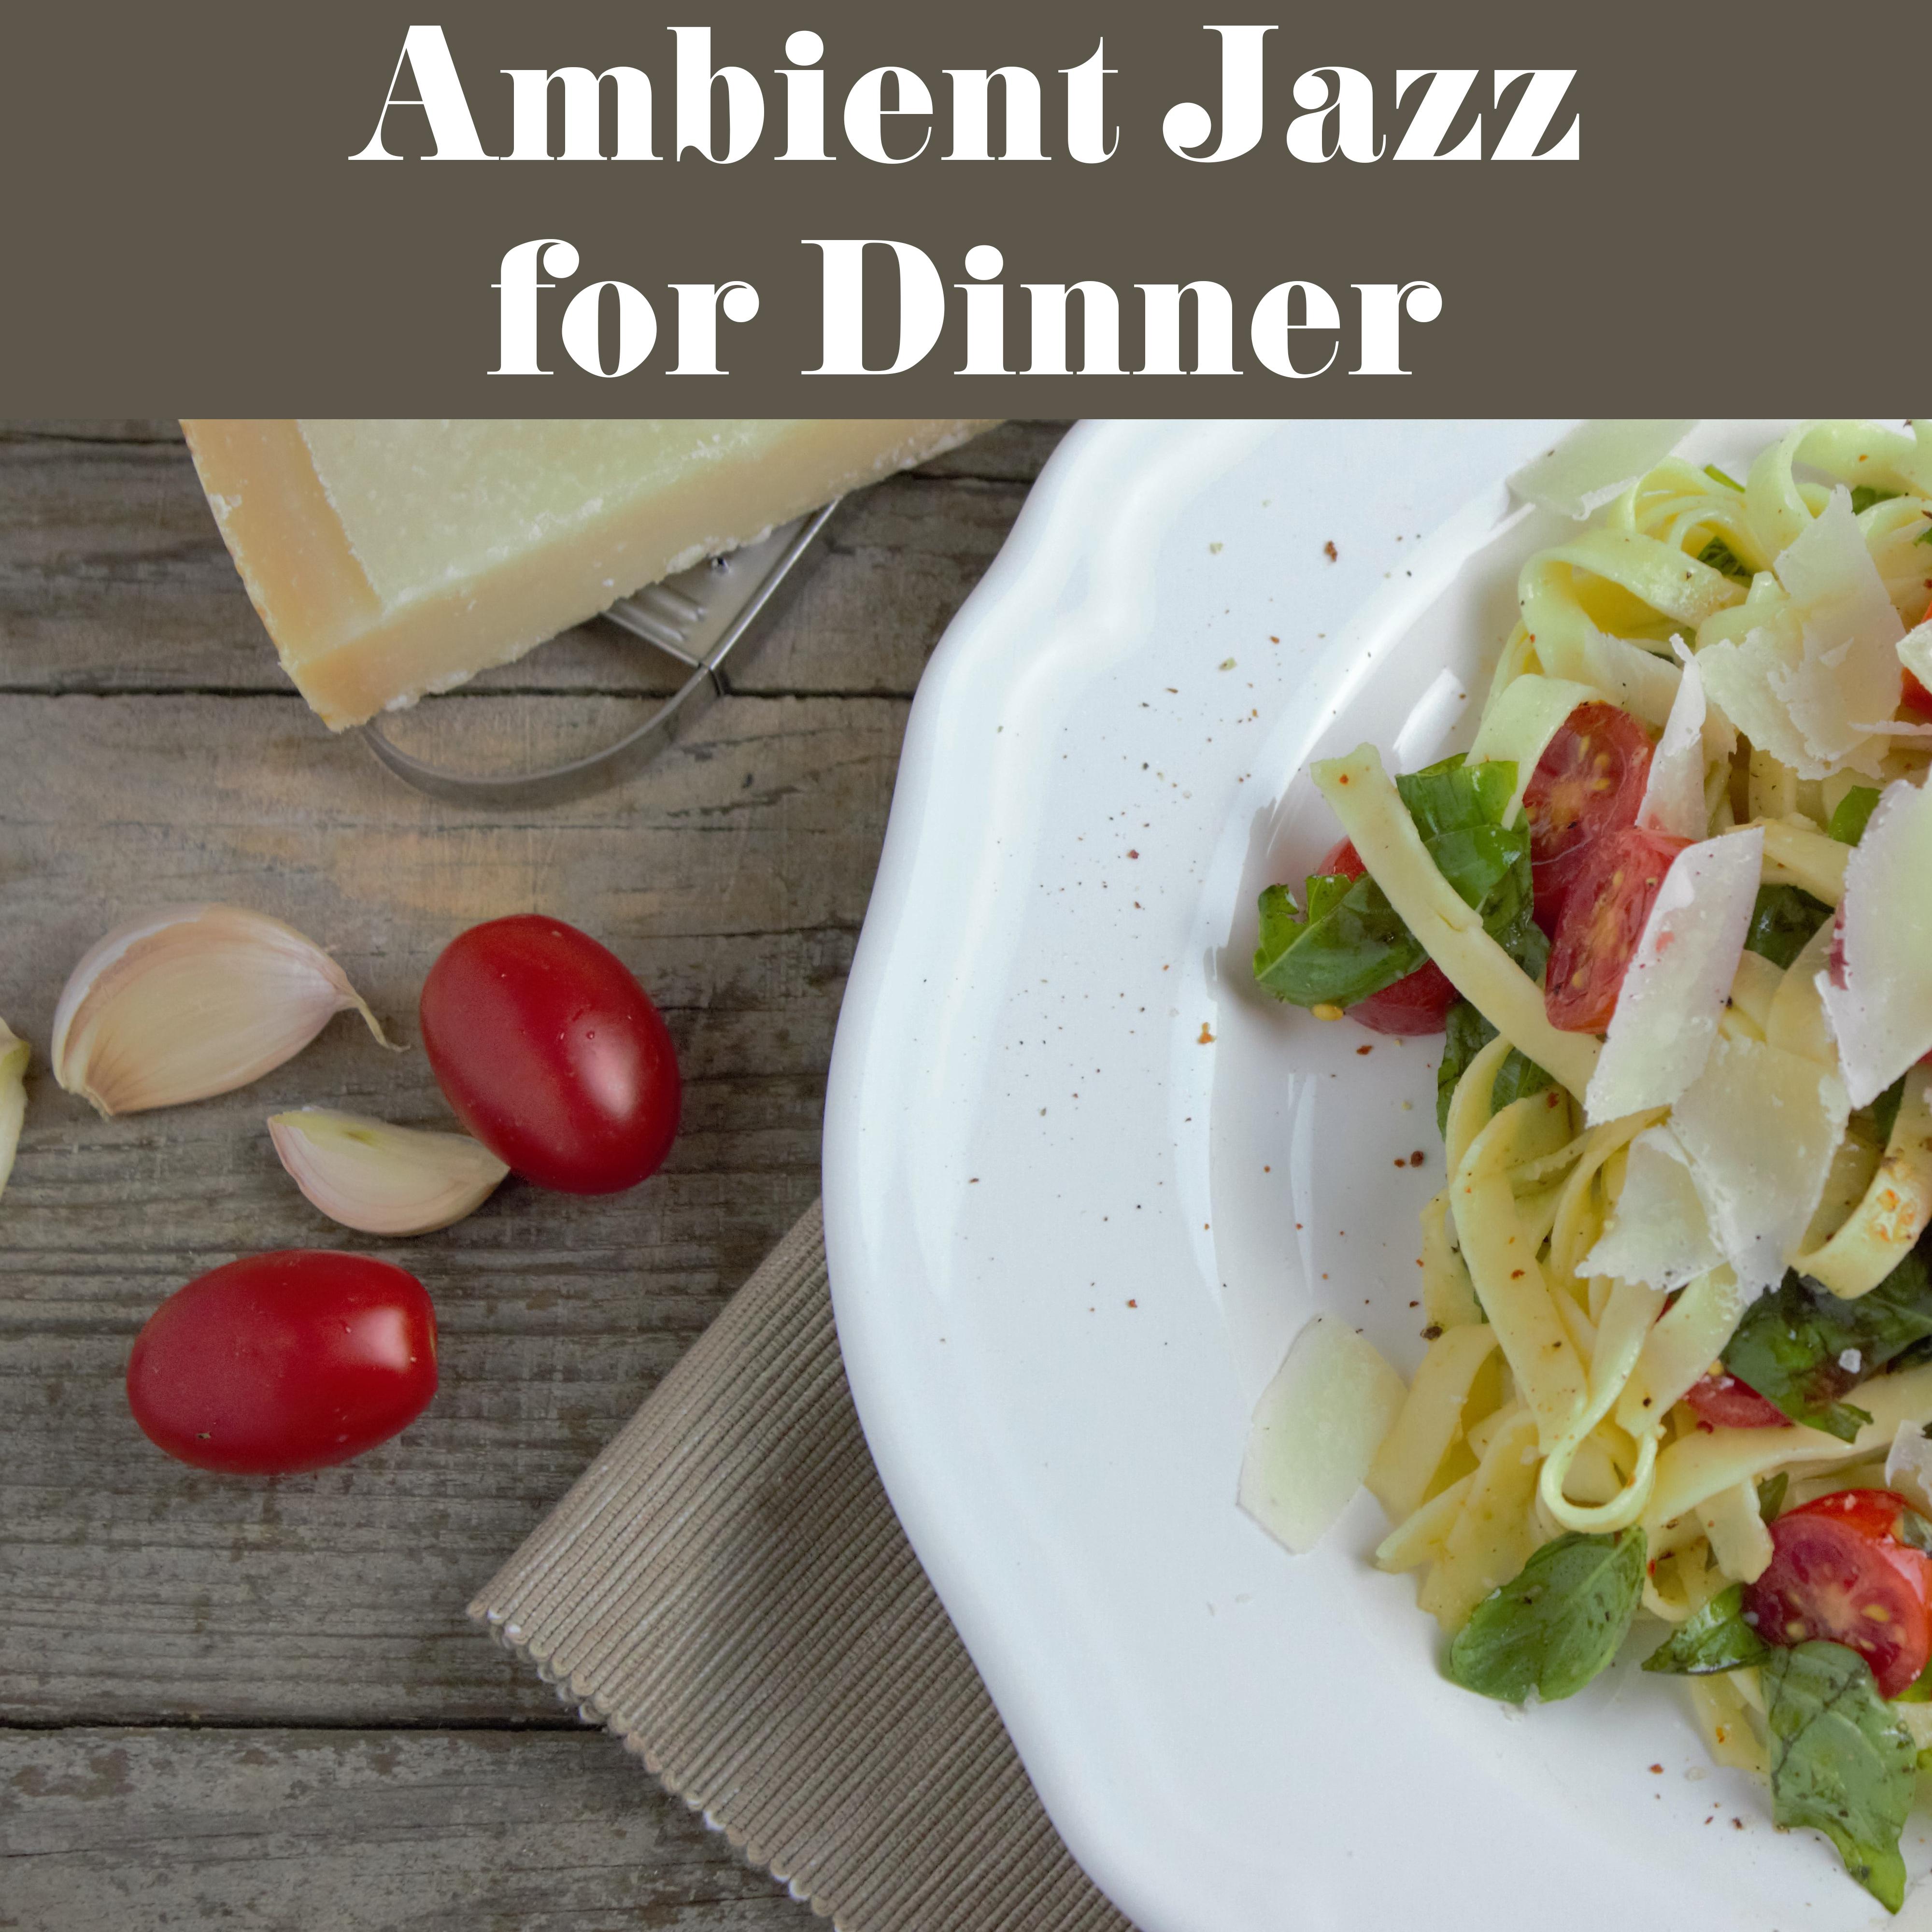 Ambient Jazz for Dinner – Mellow Sounds of Instrumental Jazz for Relax while Family Dinner